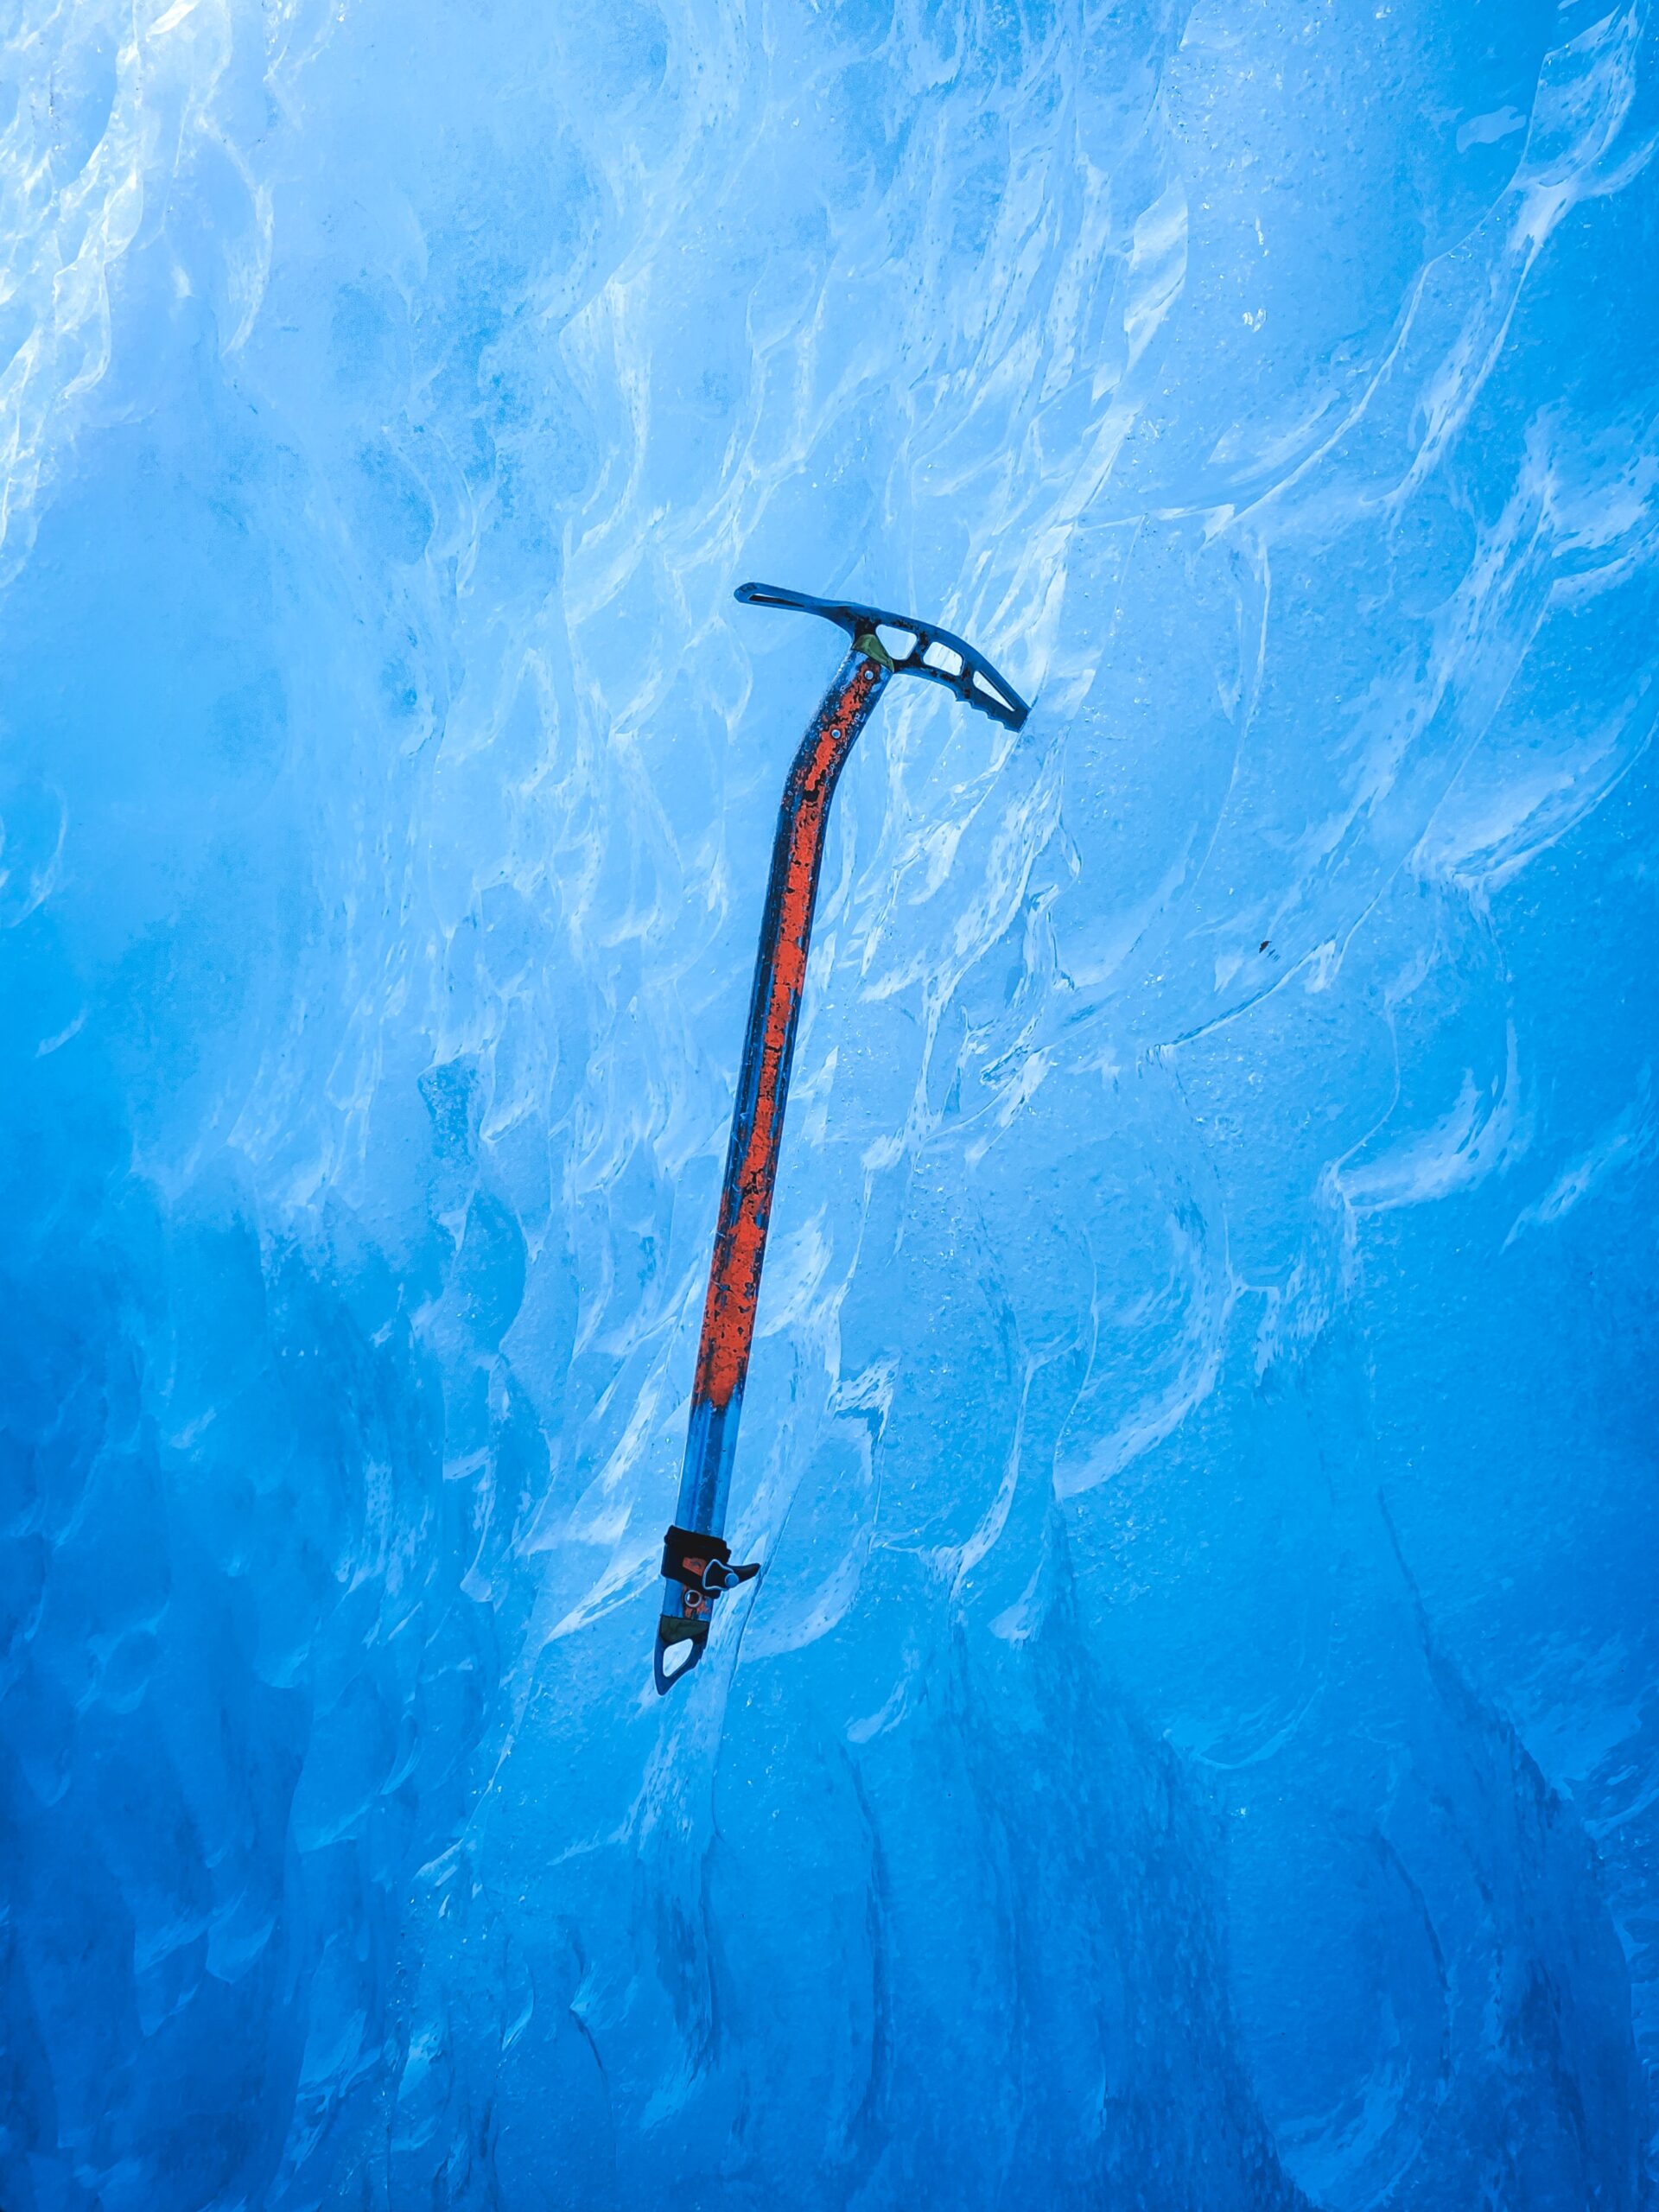 an ice axe on an ice all without a person